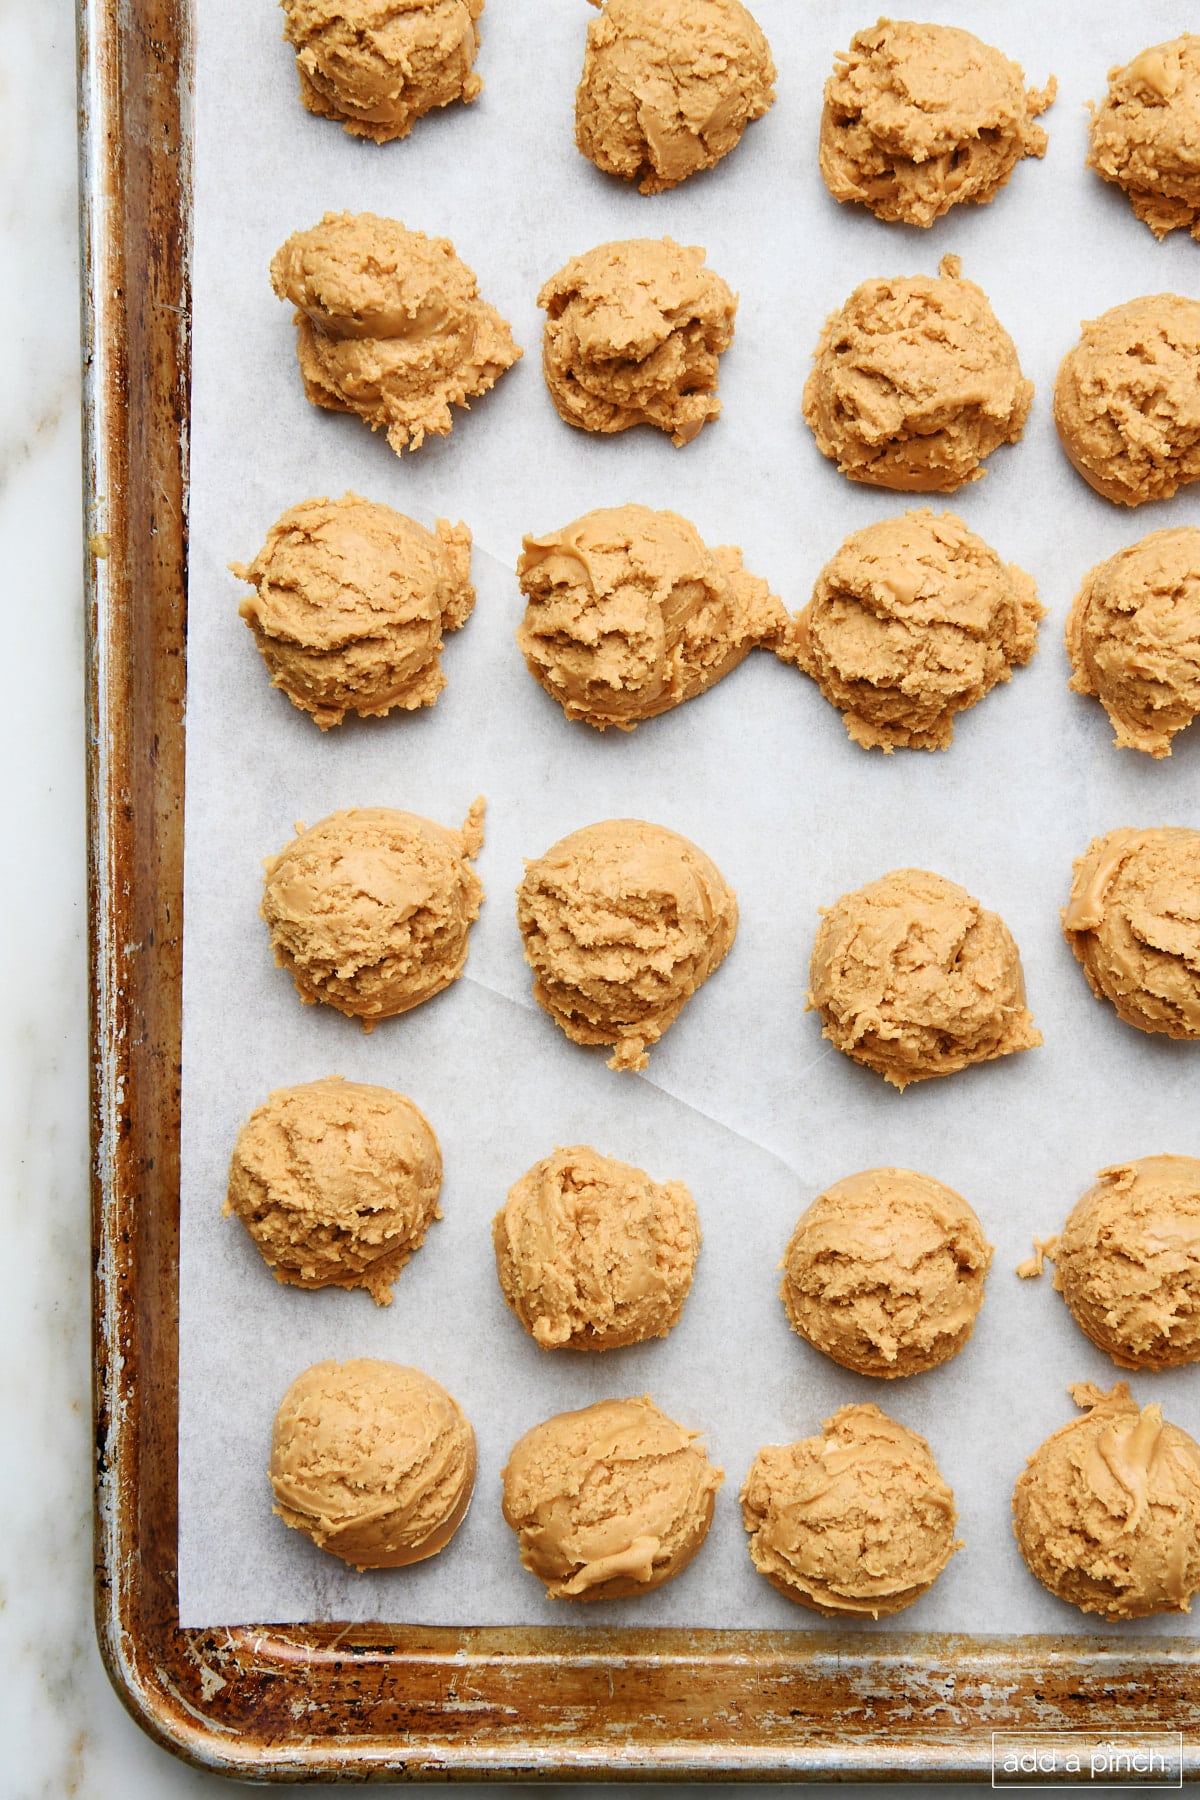 Peanut butter balls on a parchment lined baking sheet ready to be dipped in chocolate.